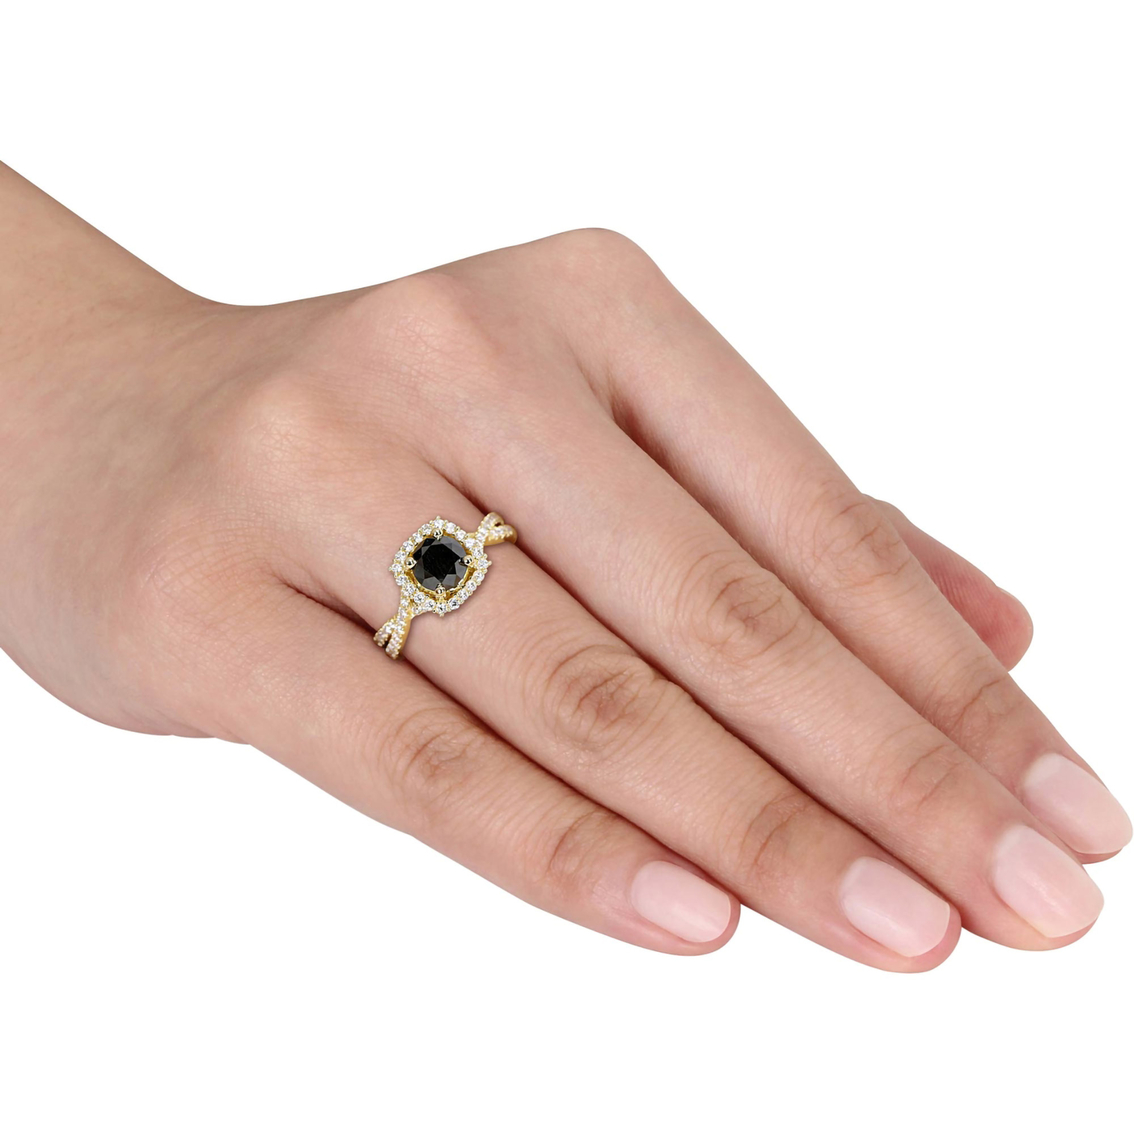 Diamore 14K Yellow Gold 1 1/2 CTW Black and White Diamond Halo Engagement Ring - Image 4 of 4